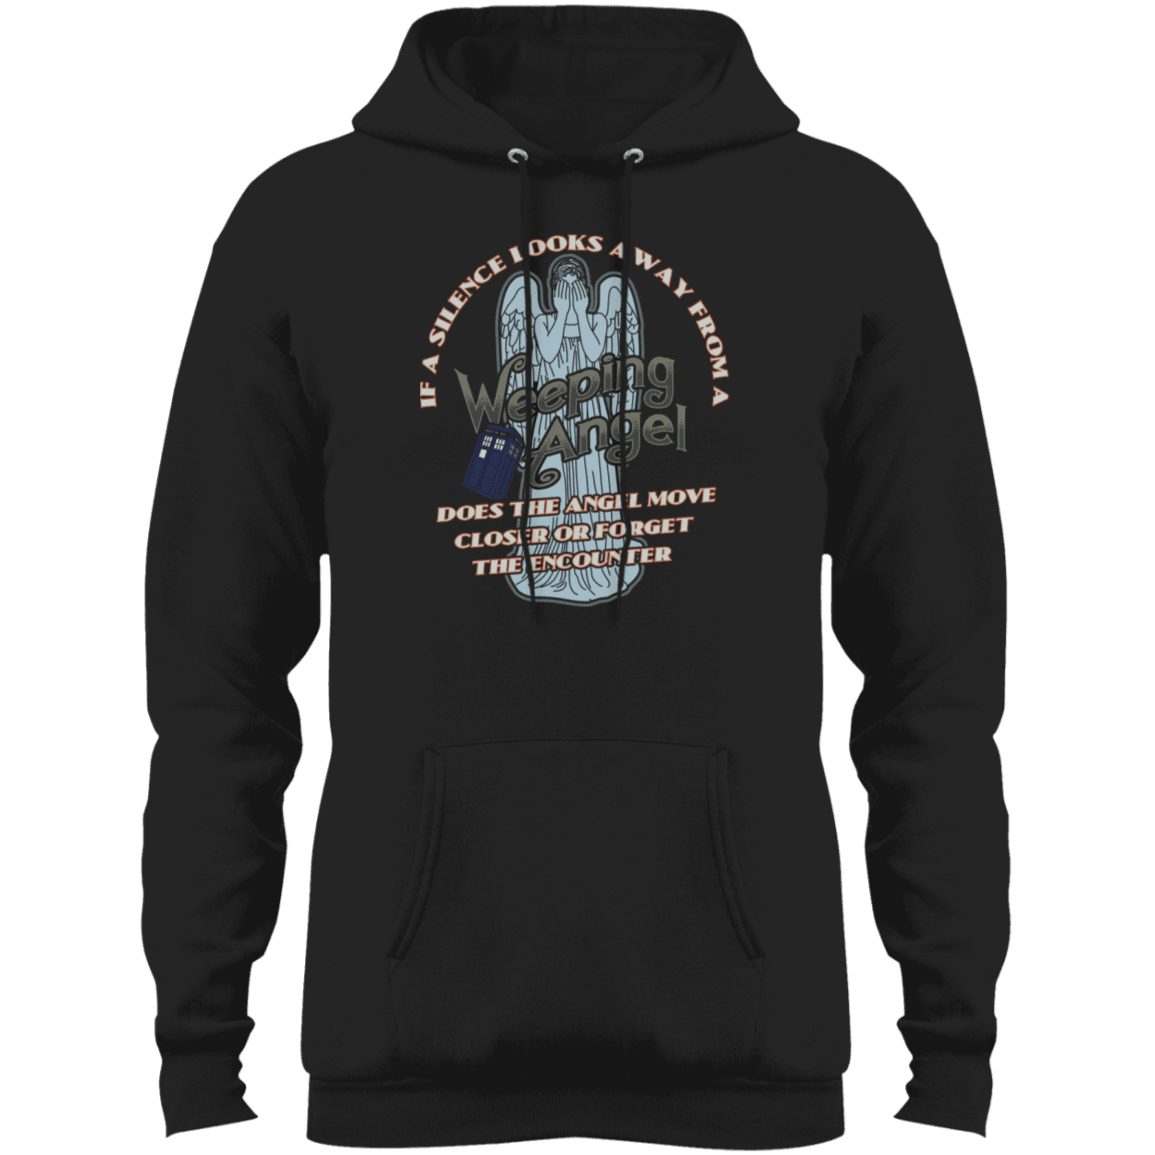 Designs by MyUtopia Shout Out:If a Silence Looks away from a Weeping Angel... Core Fleece Pullover Hoodie - Black,S / Jet Black,Sweatshirts